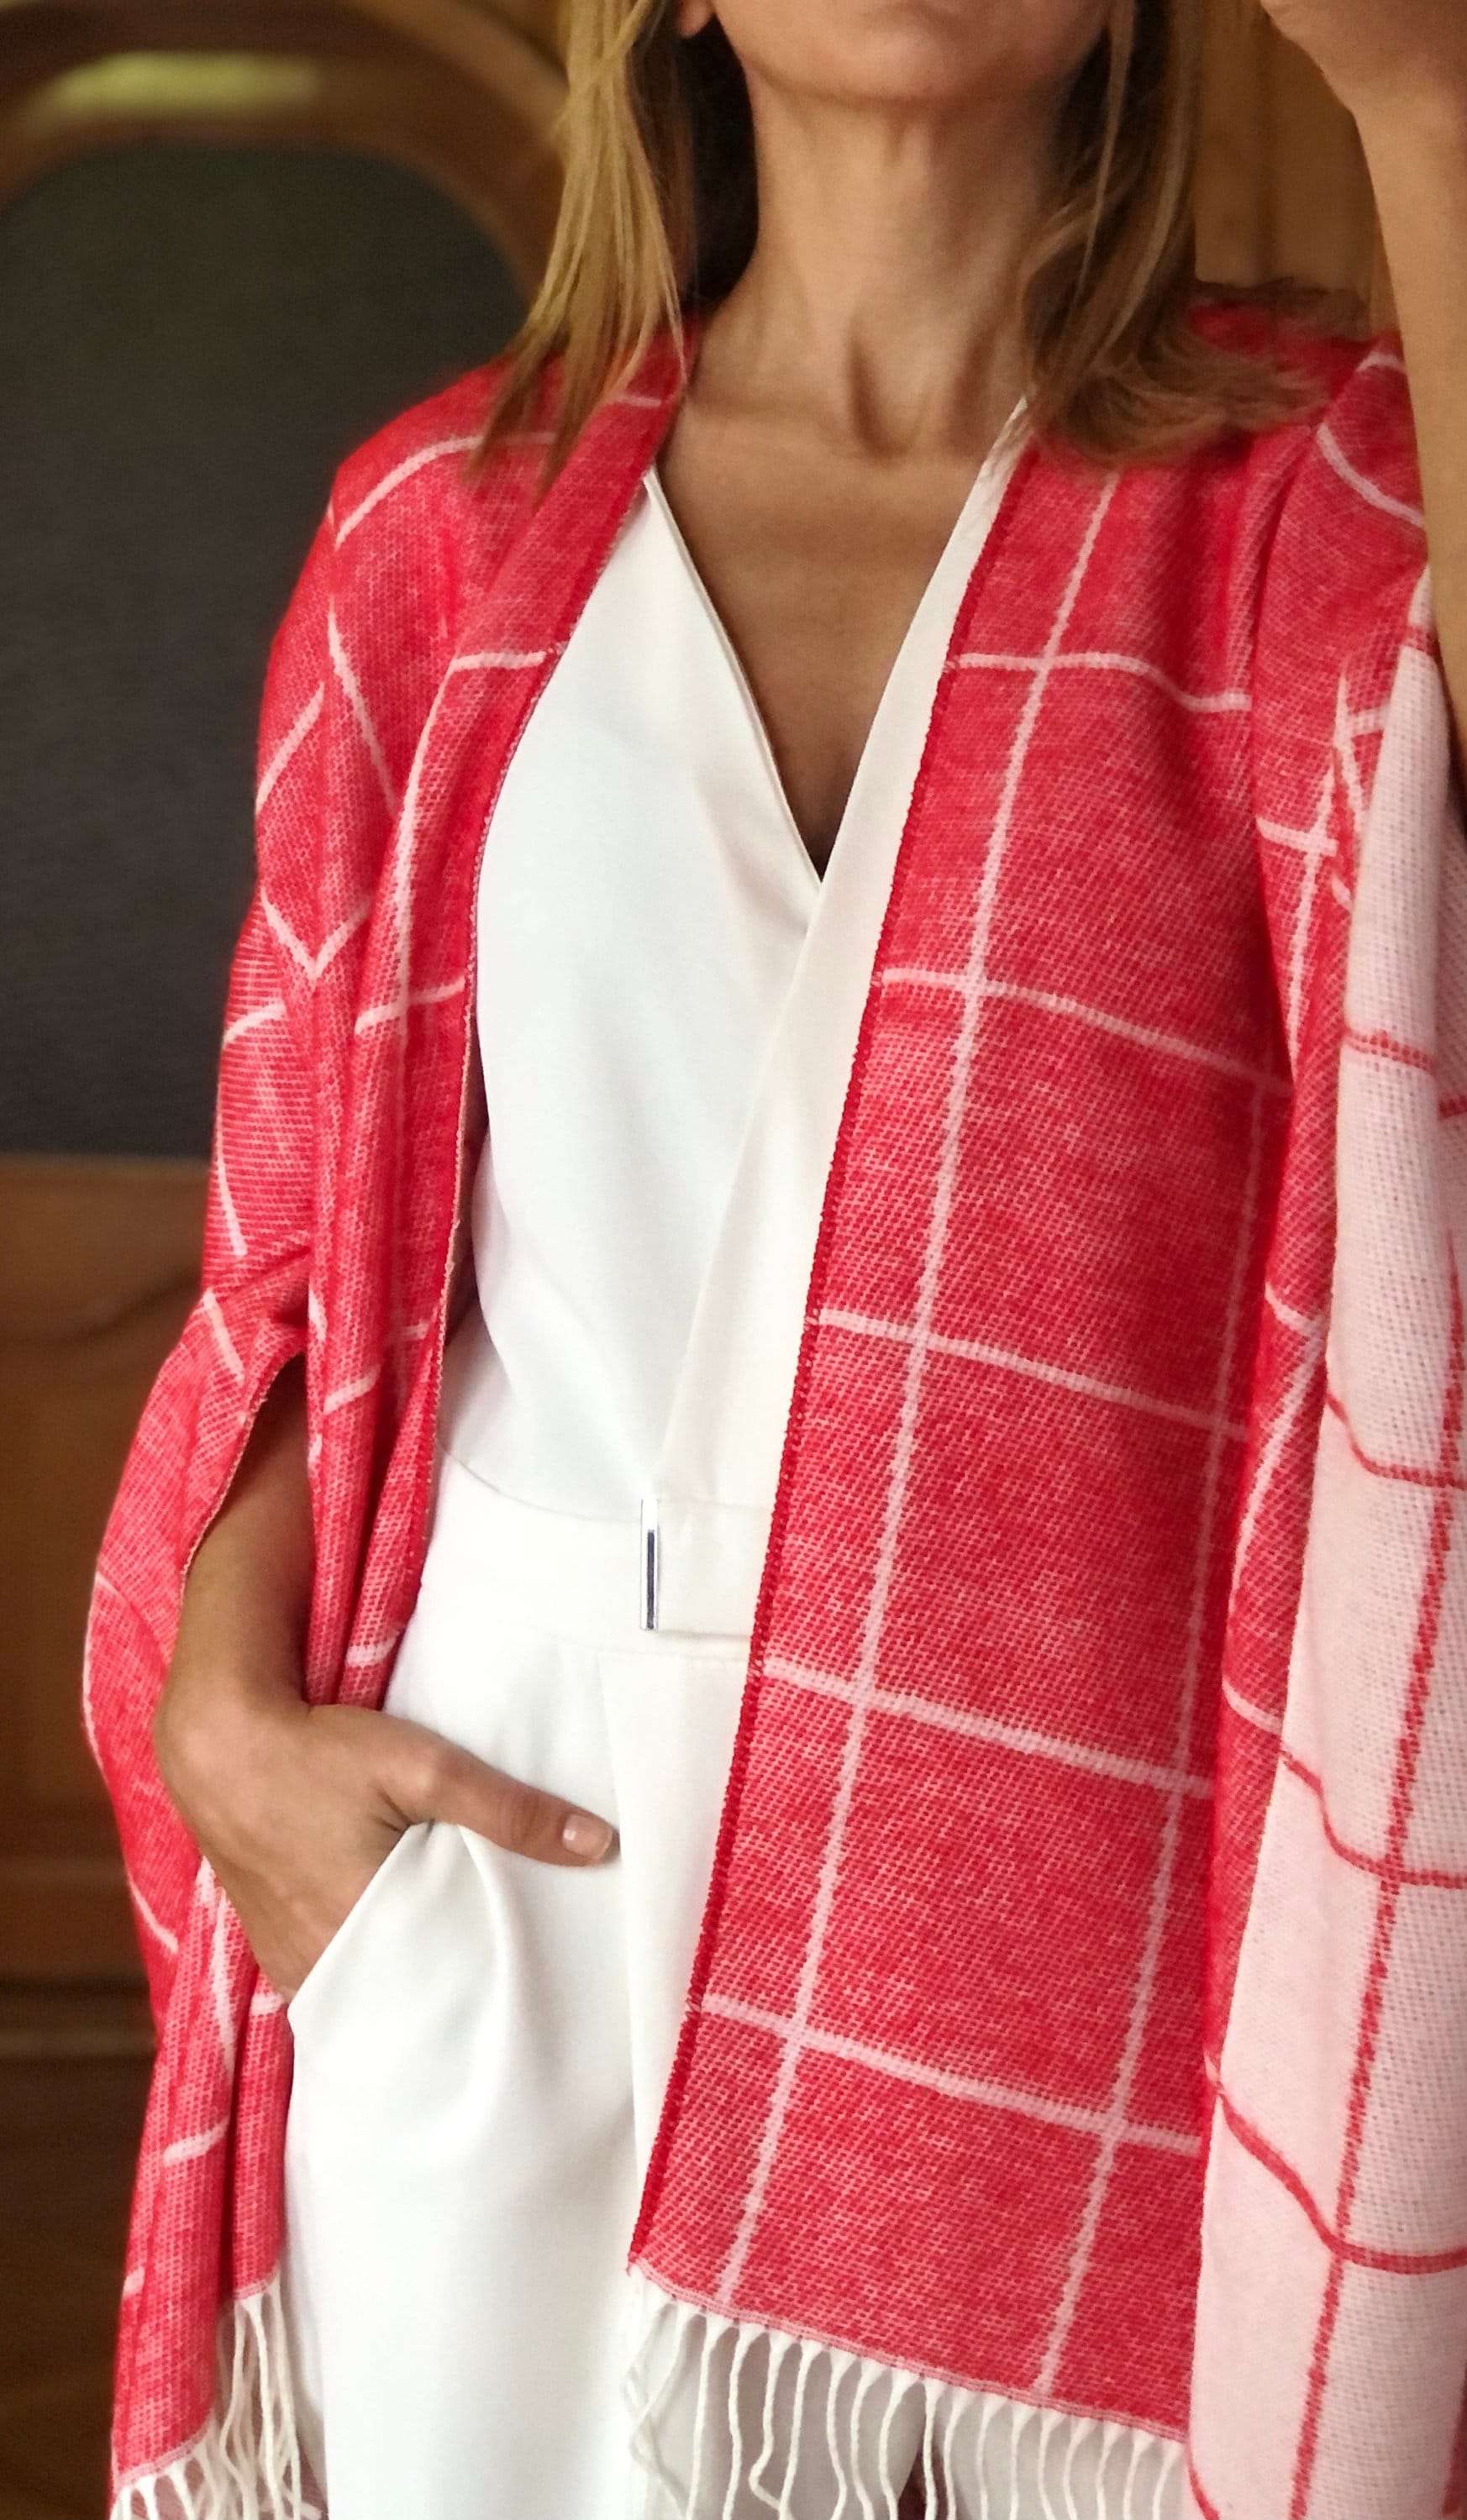 Looking for a special special Day gift? Check out our beautiful Red White Wool Acrylic Large Soft Poncho. This poncho is perfect for any woman who loves staying warm and stylish.